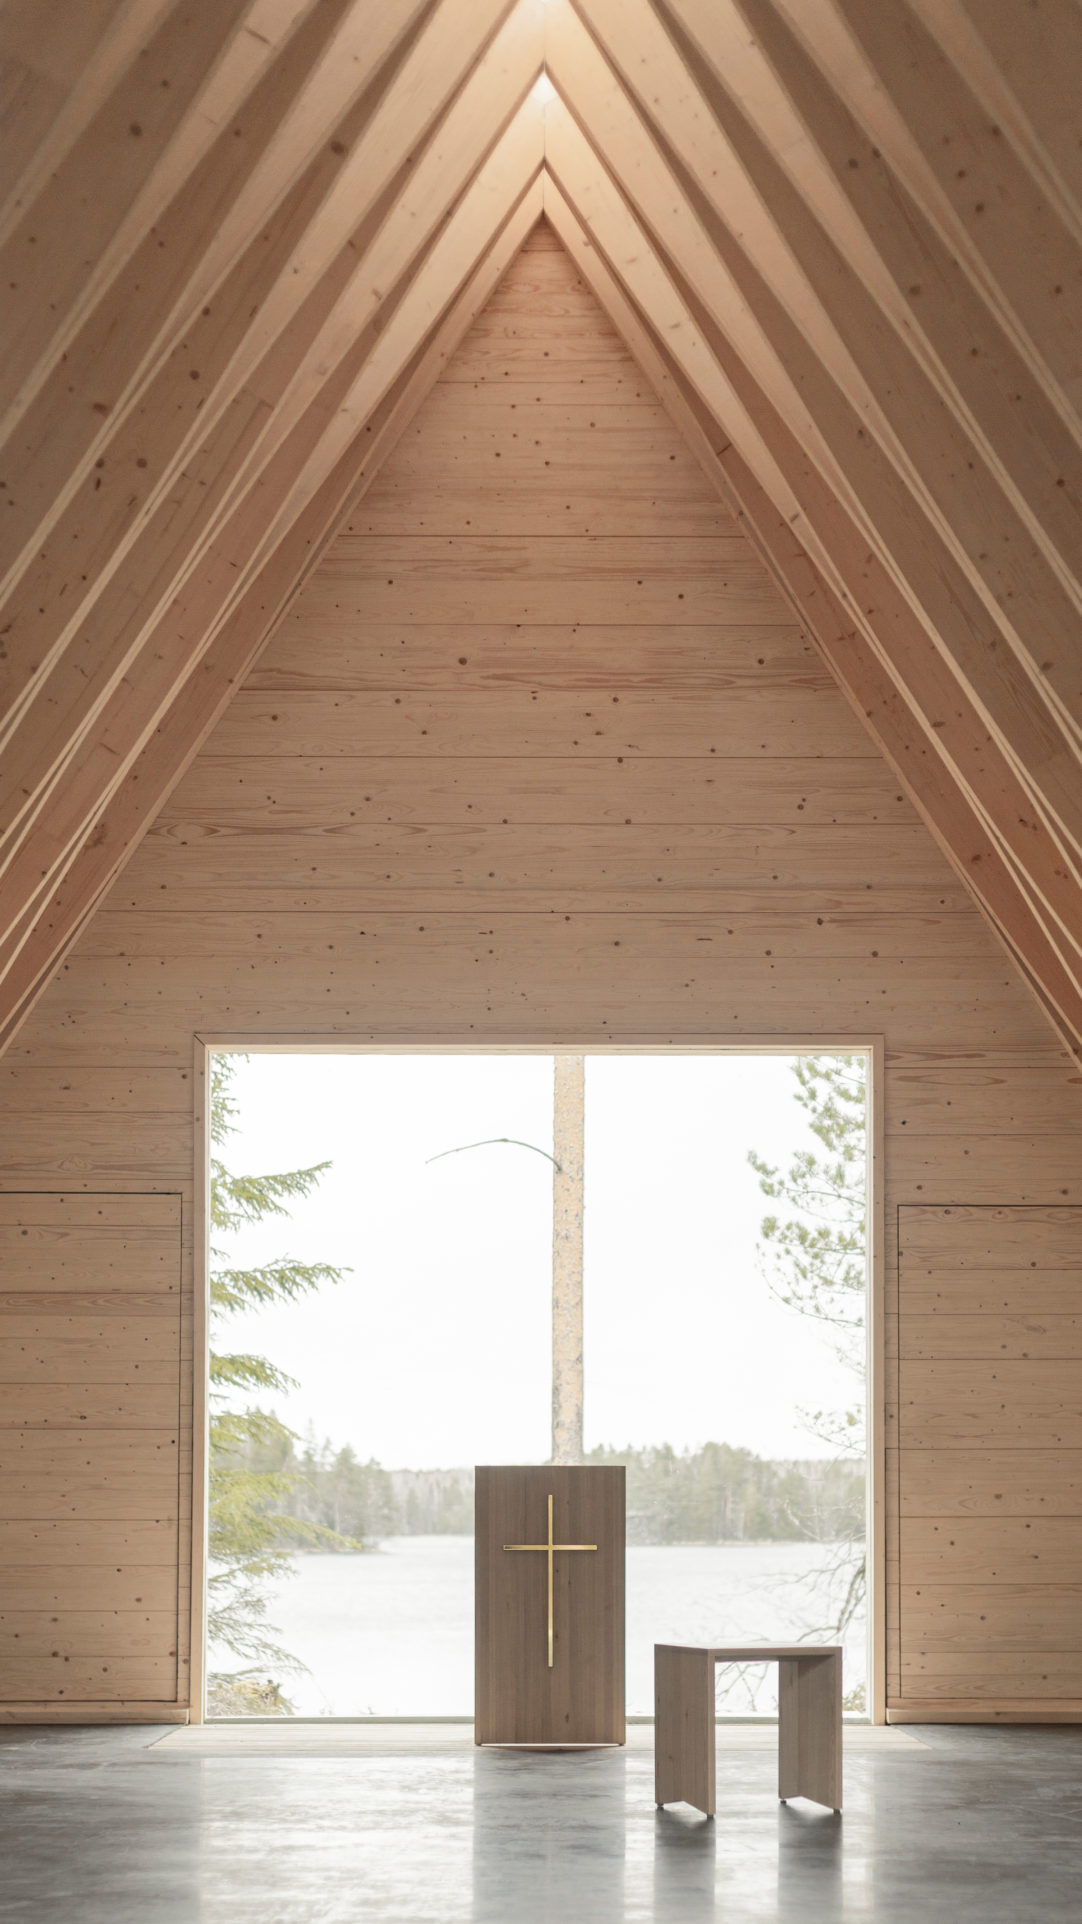 The Forest Chapel in Finland by NOAN